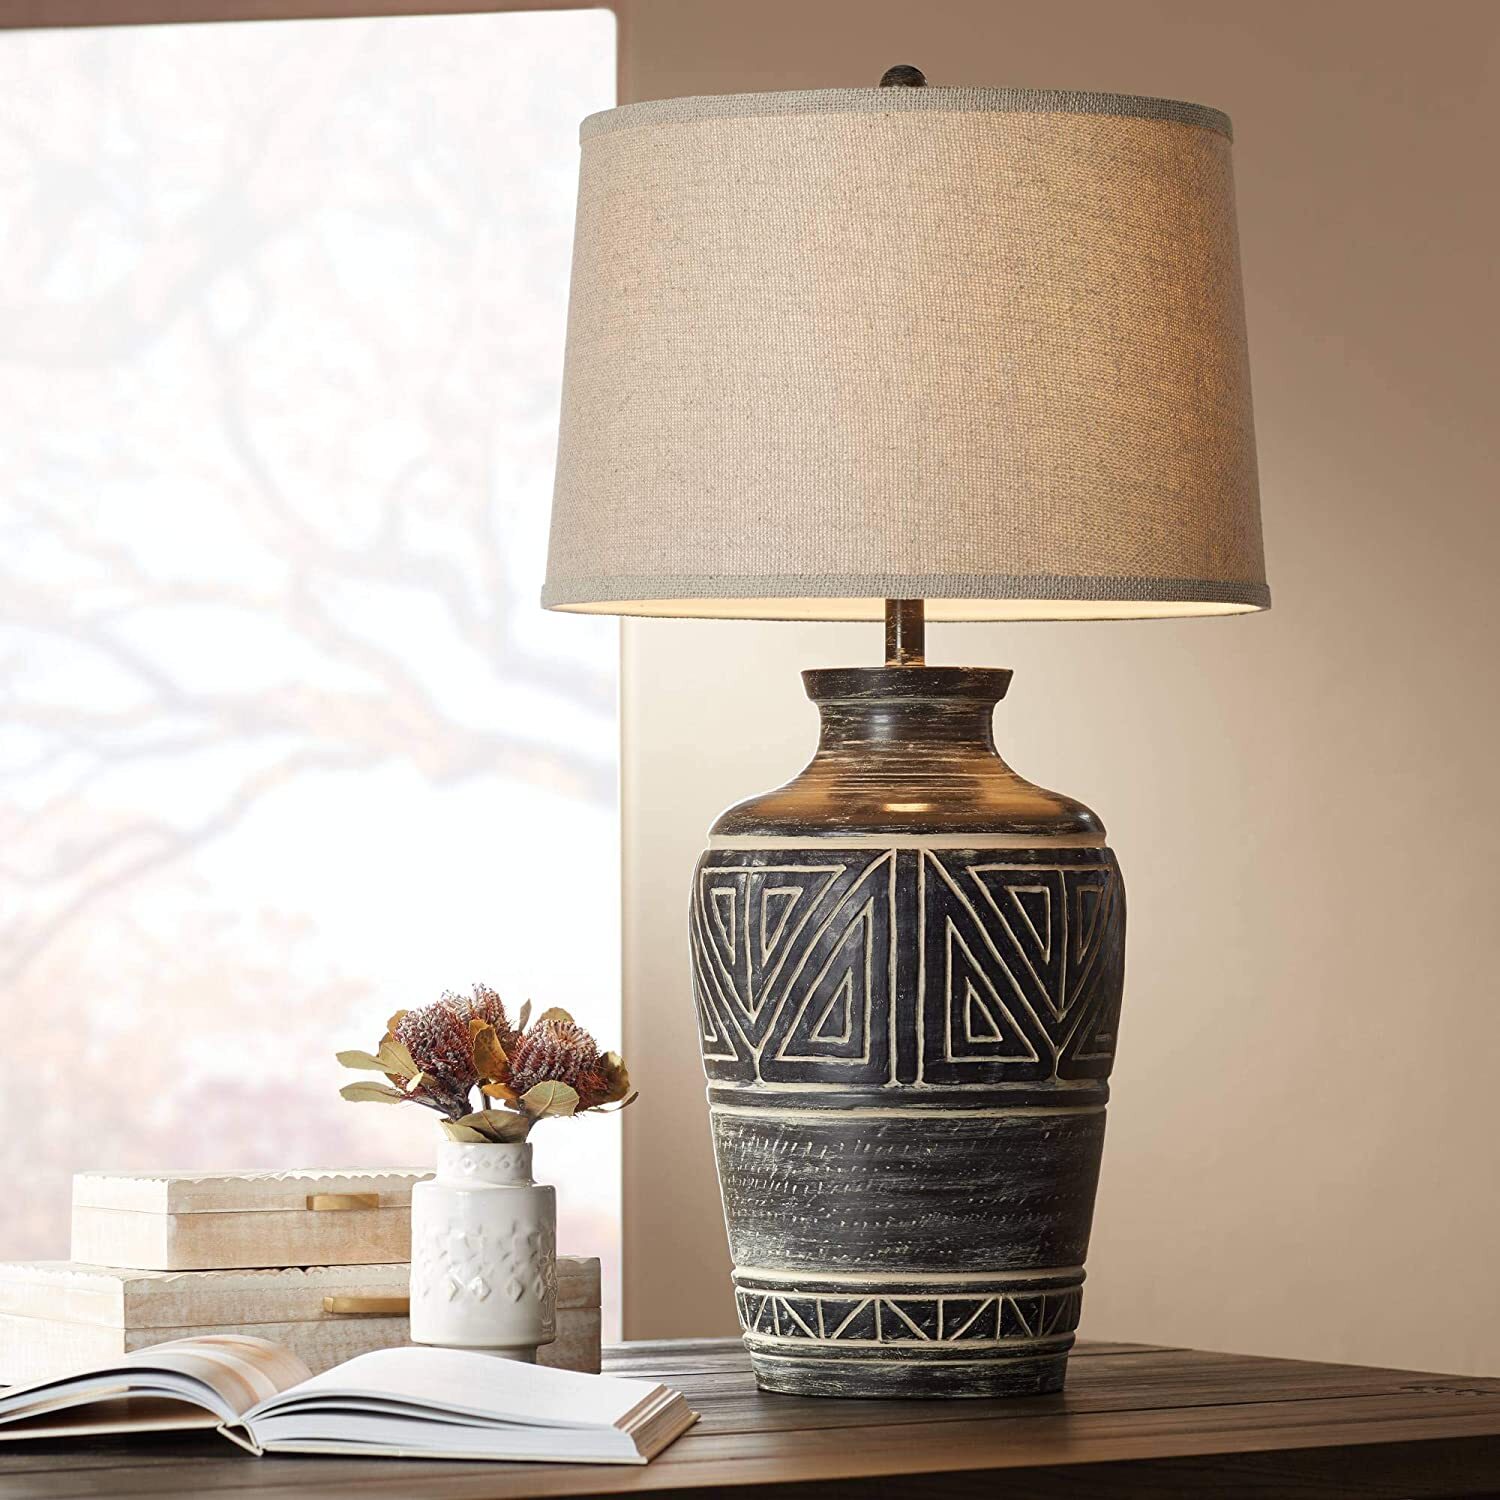 Neutral southwest lamp shades for ornate lamps